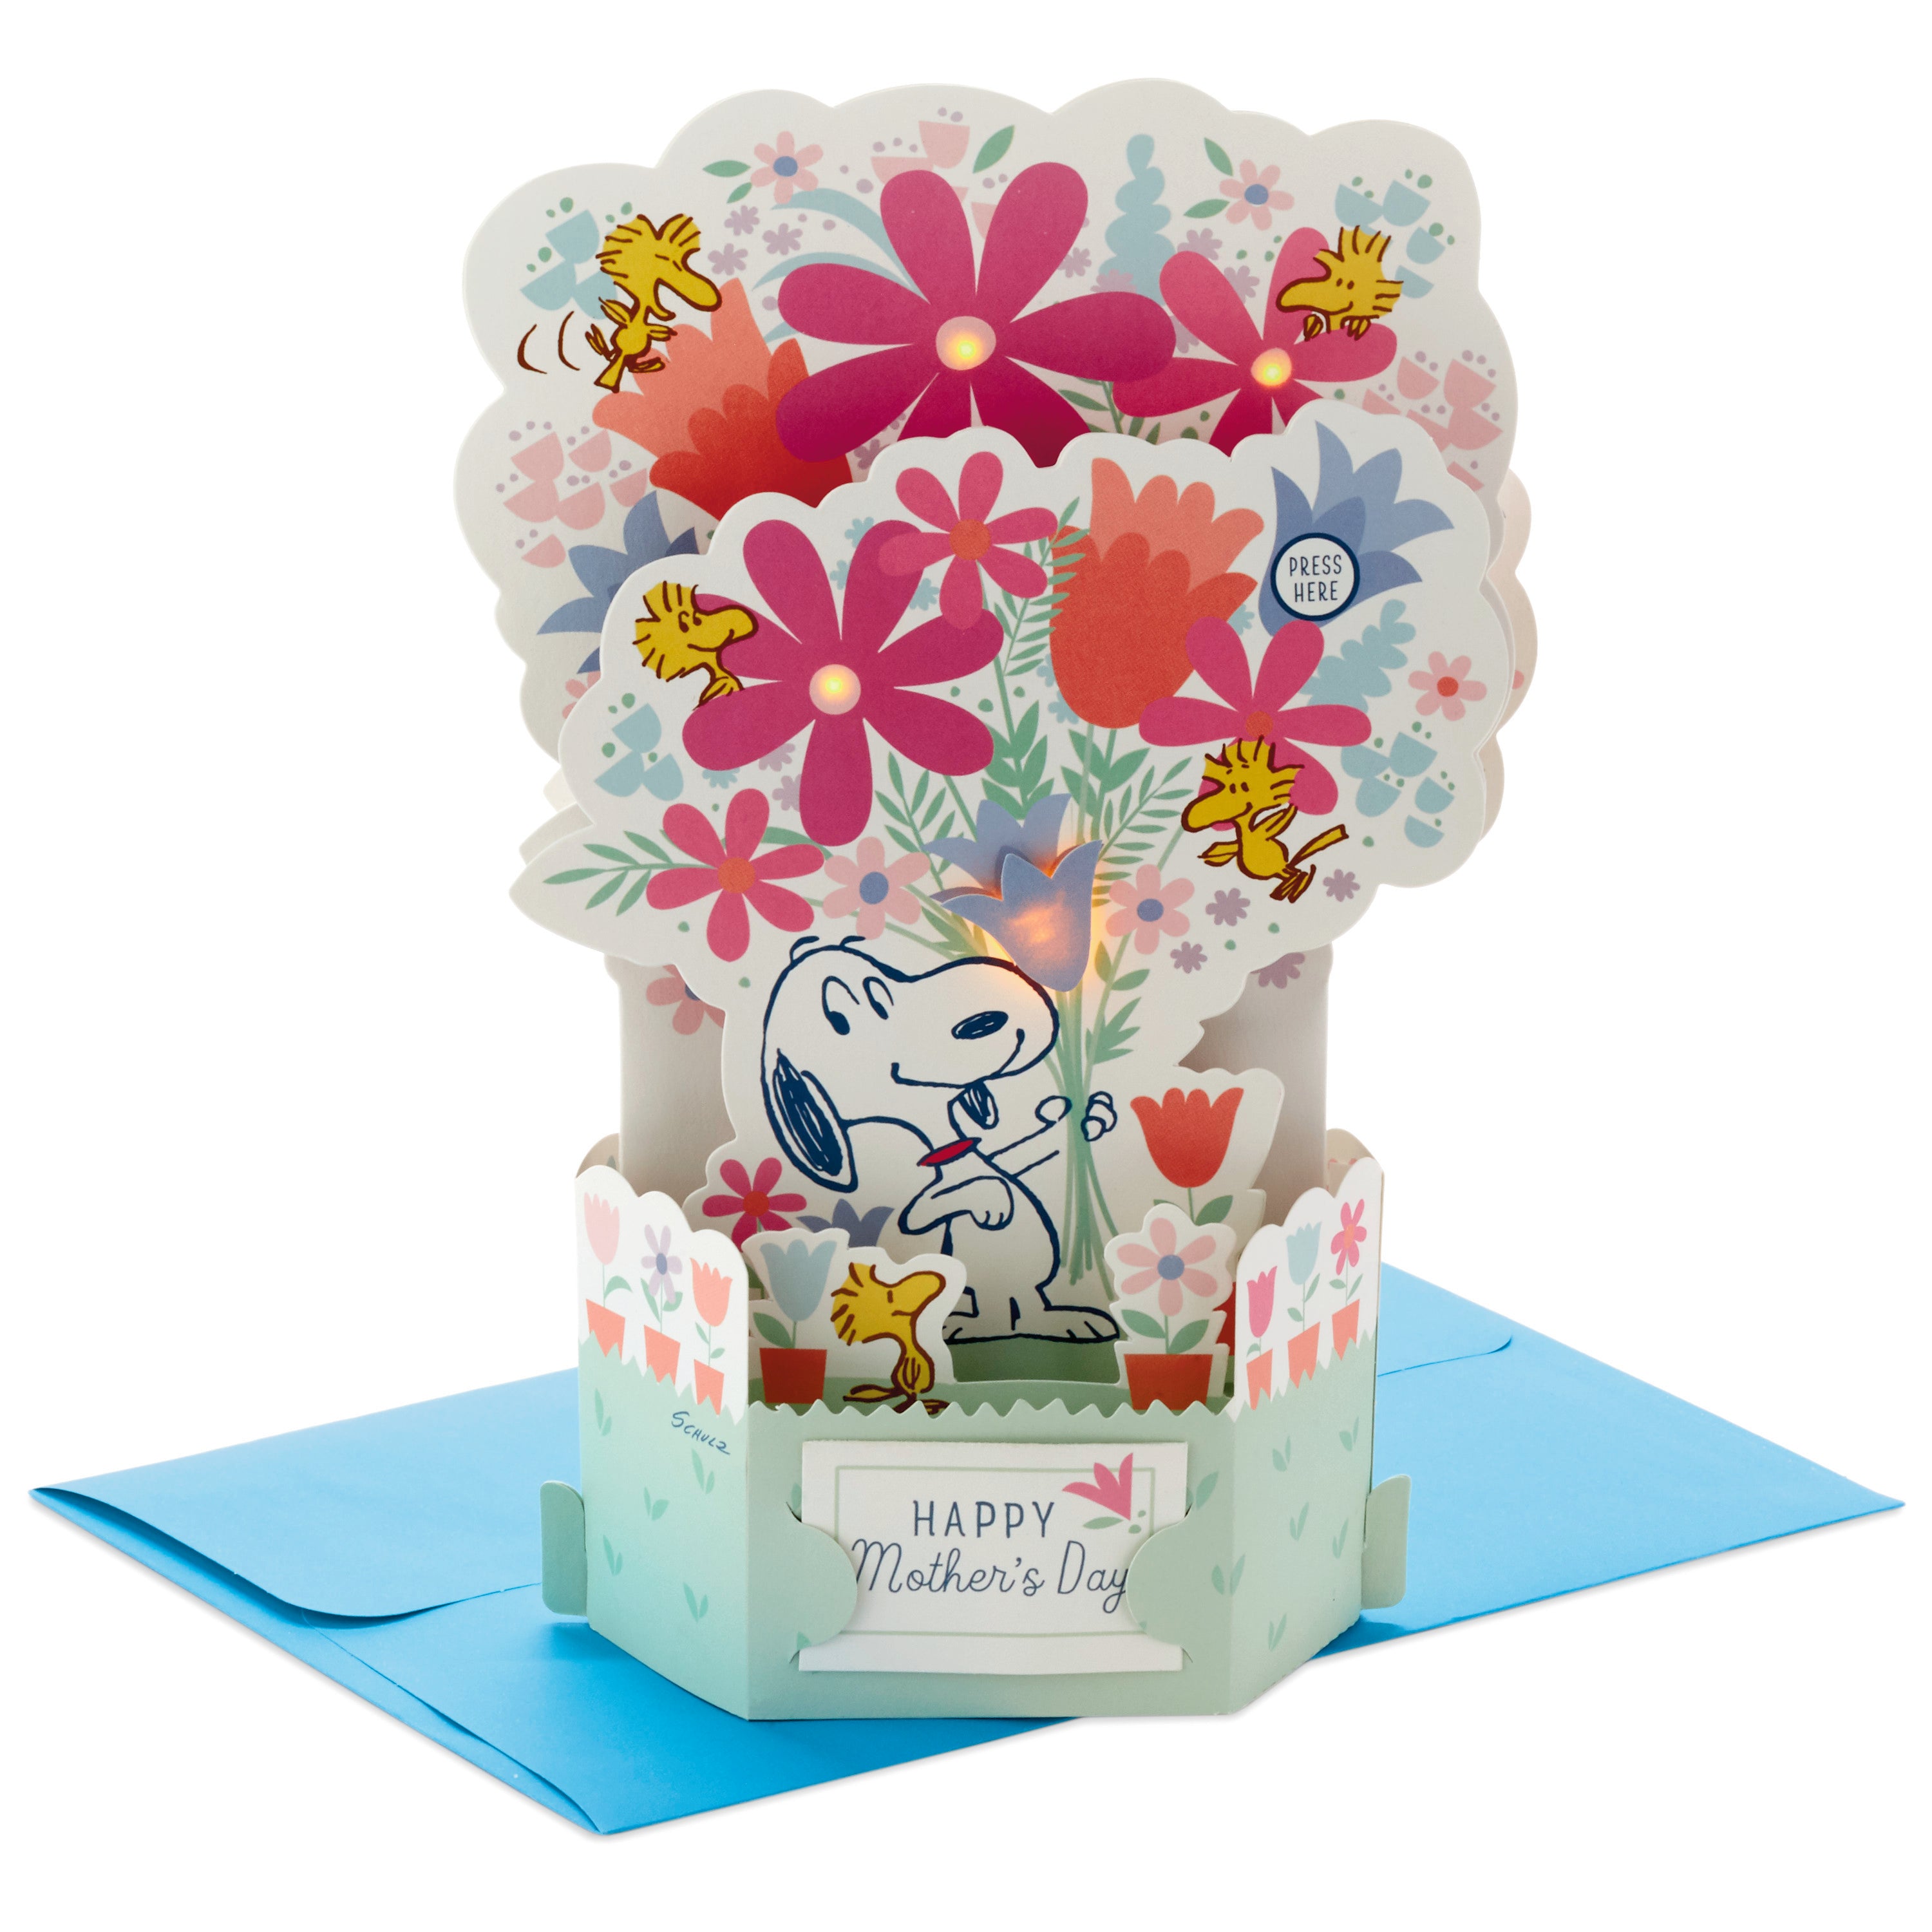 Peanuts Pop Up Mother's Day Card with Song (Snoopy Displayable Bouquet, Plays Instrumental Music)